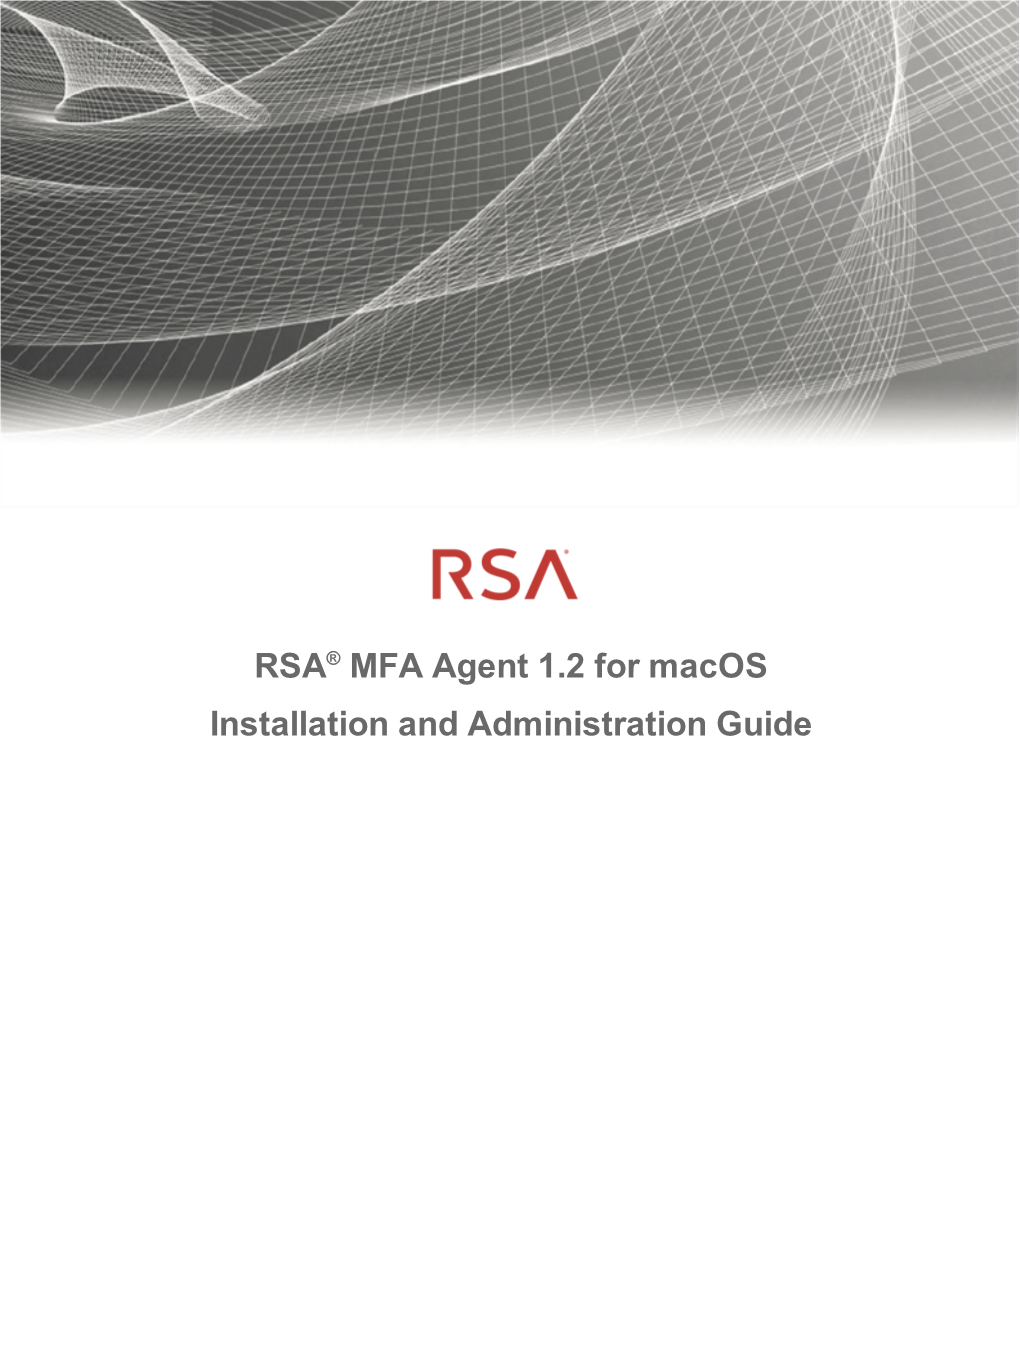 RSA MFA Agent 1.2 for Macos Installation and Administration Guide